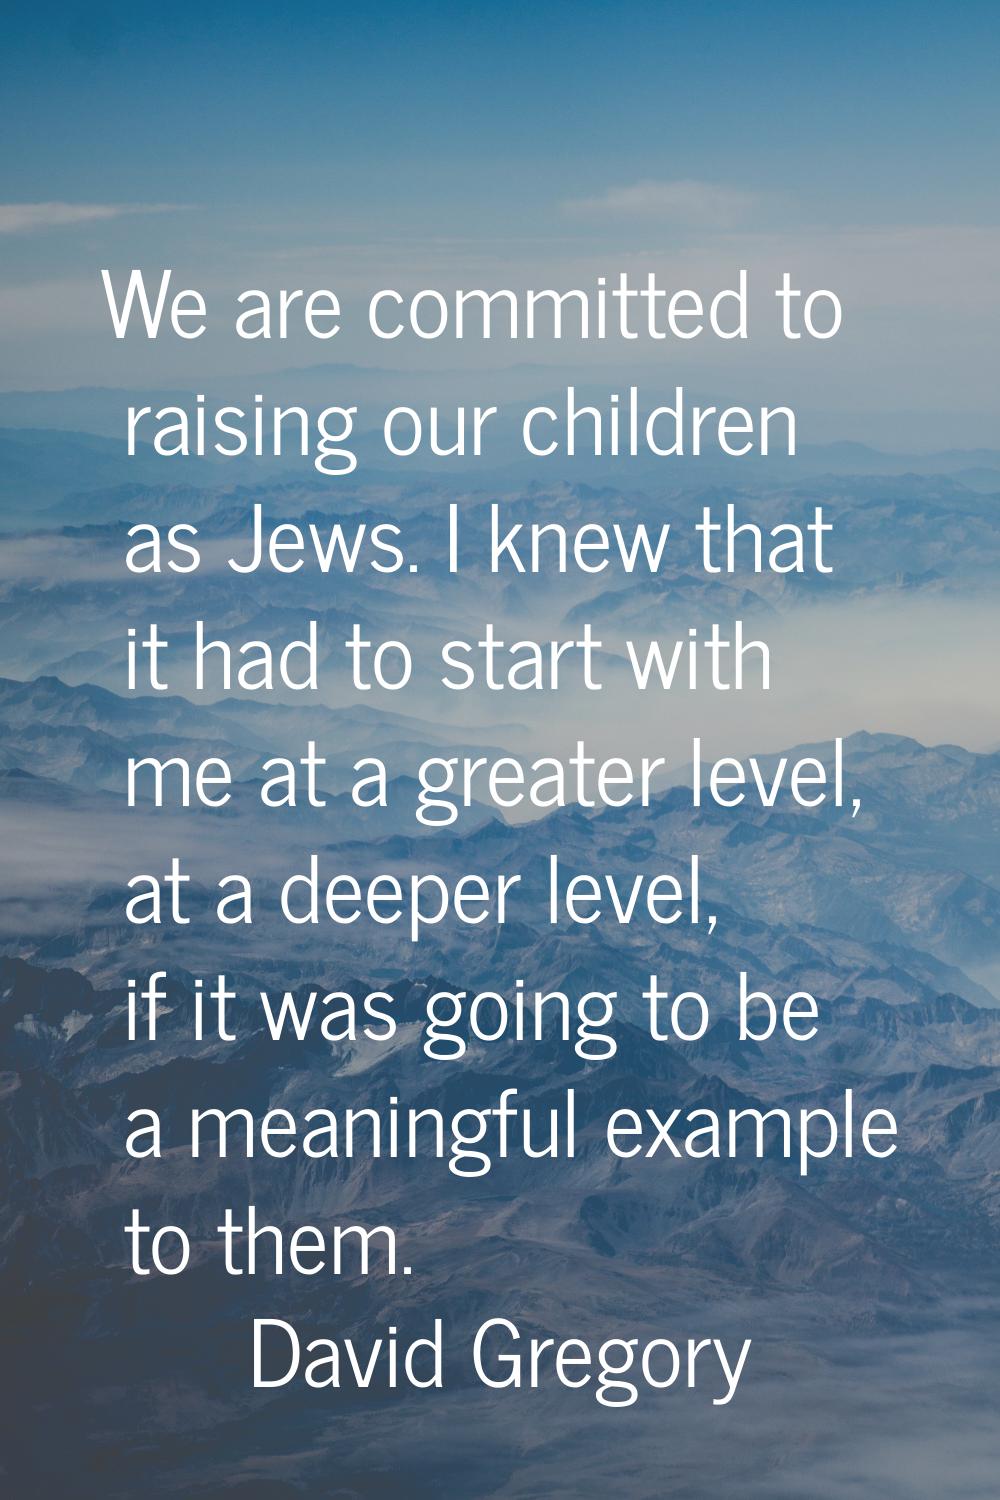 We are committed to raising our children as Jews. I knew that it had to start with me at a greater 